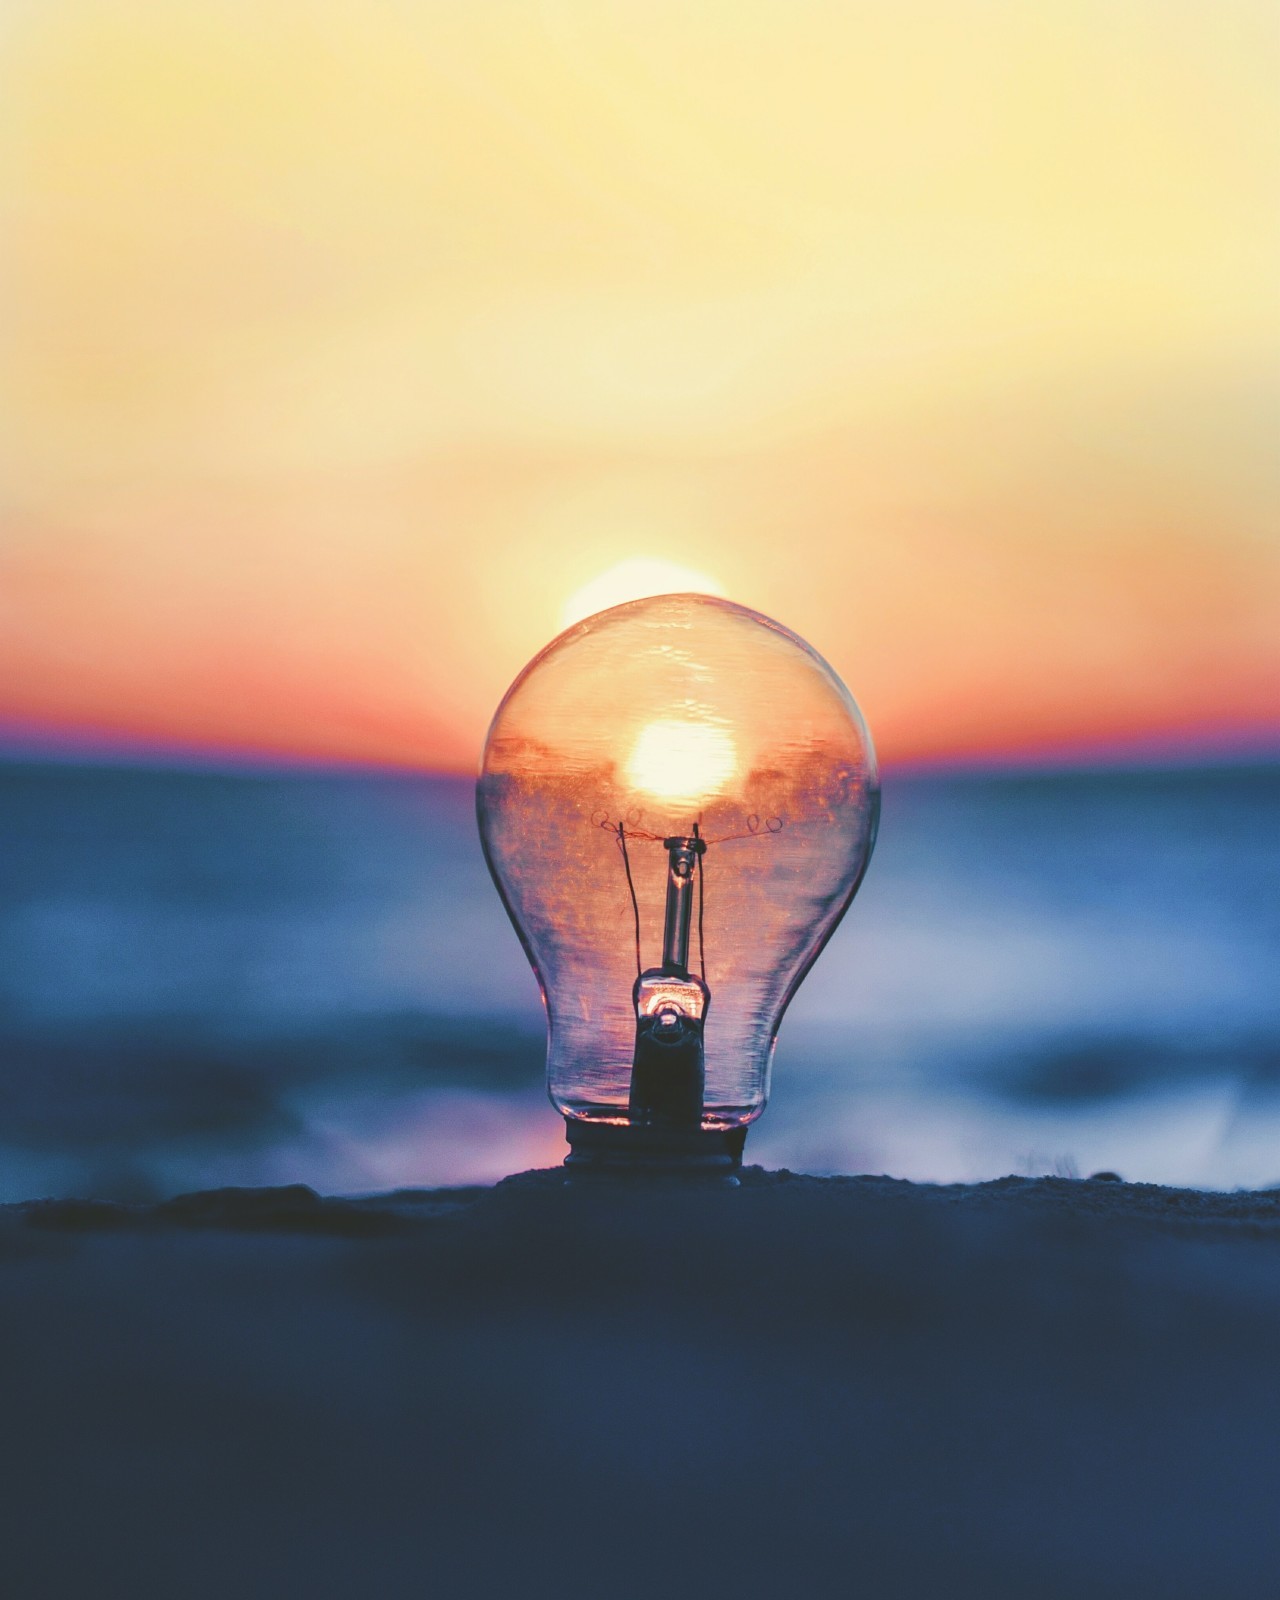 Lightbulb in front of a sunset - Photo by Ameen Fahmy